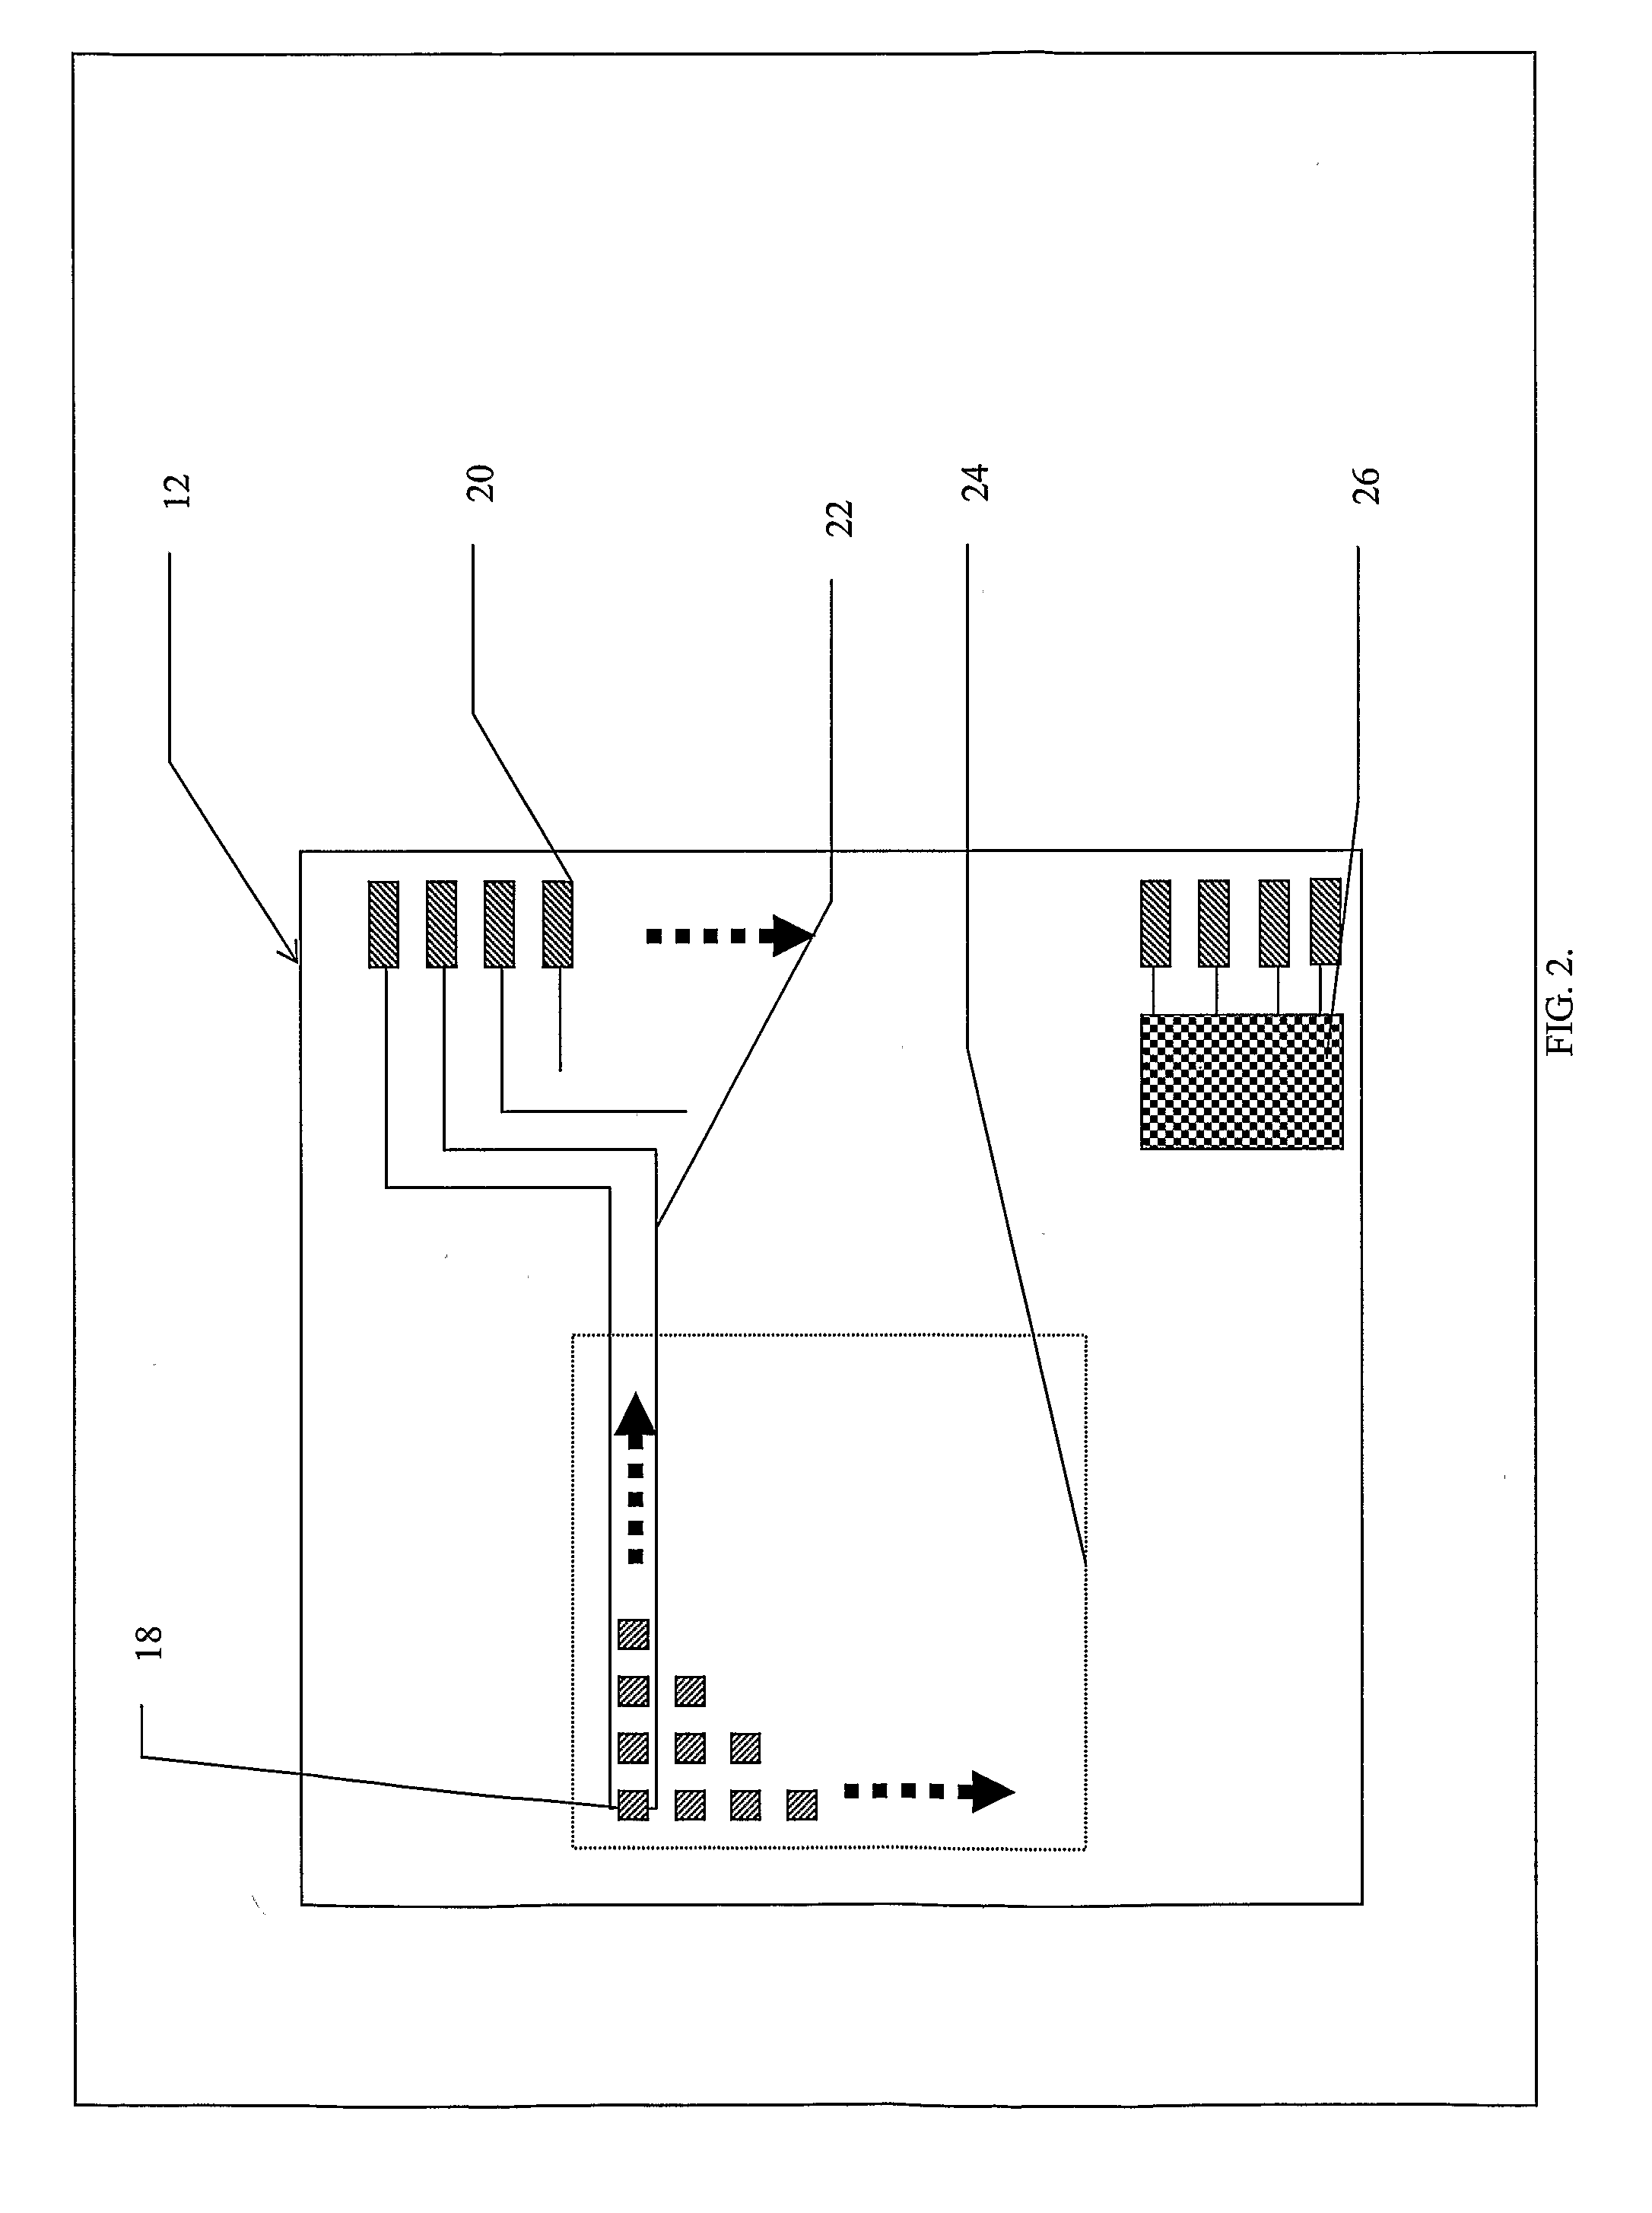 Flexible Apparatus and Method for Monitoring and Delivery